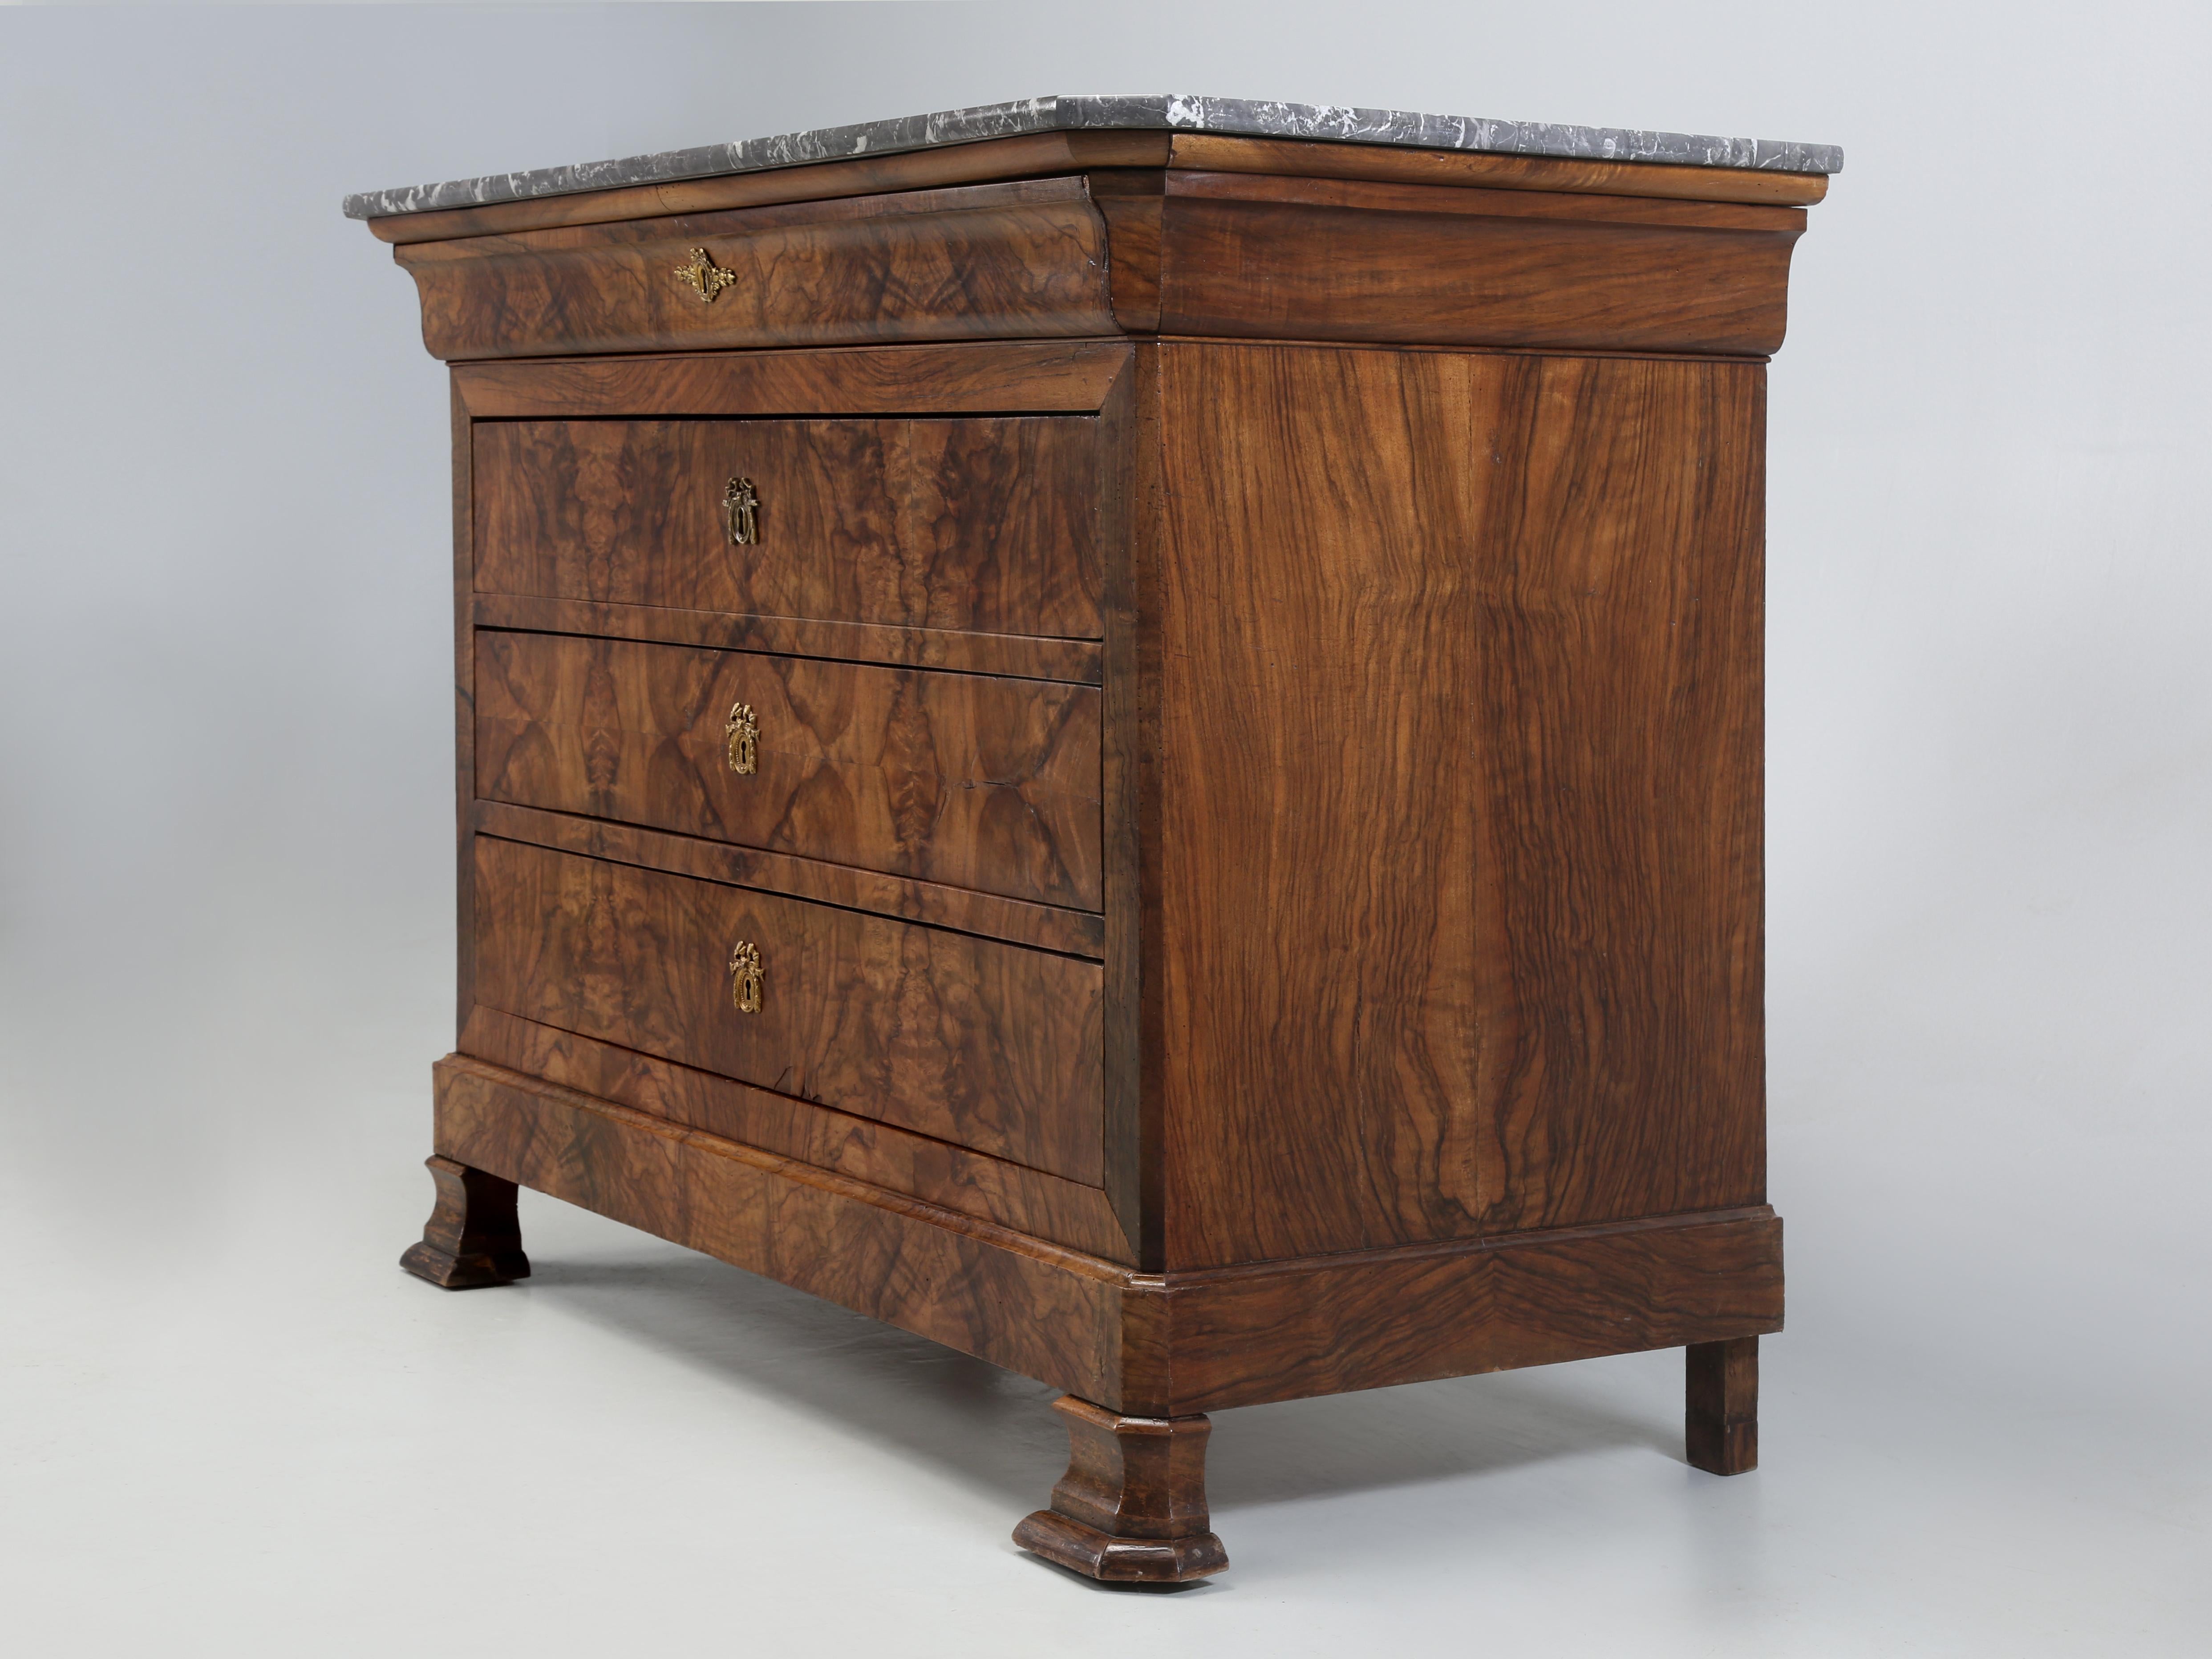 Antique French Commode, Dresser or Chest of Drawers in the Louis Philippe style. Our Antique French Commode was made with Burl-Walnut that has been carefully Book-Matched with a beautiful marble top. The style of furniture under King Louis Philippe